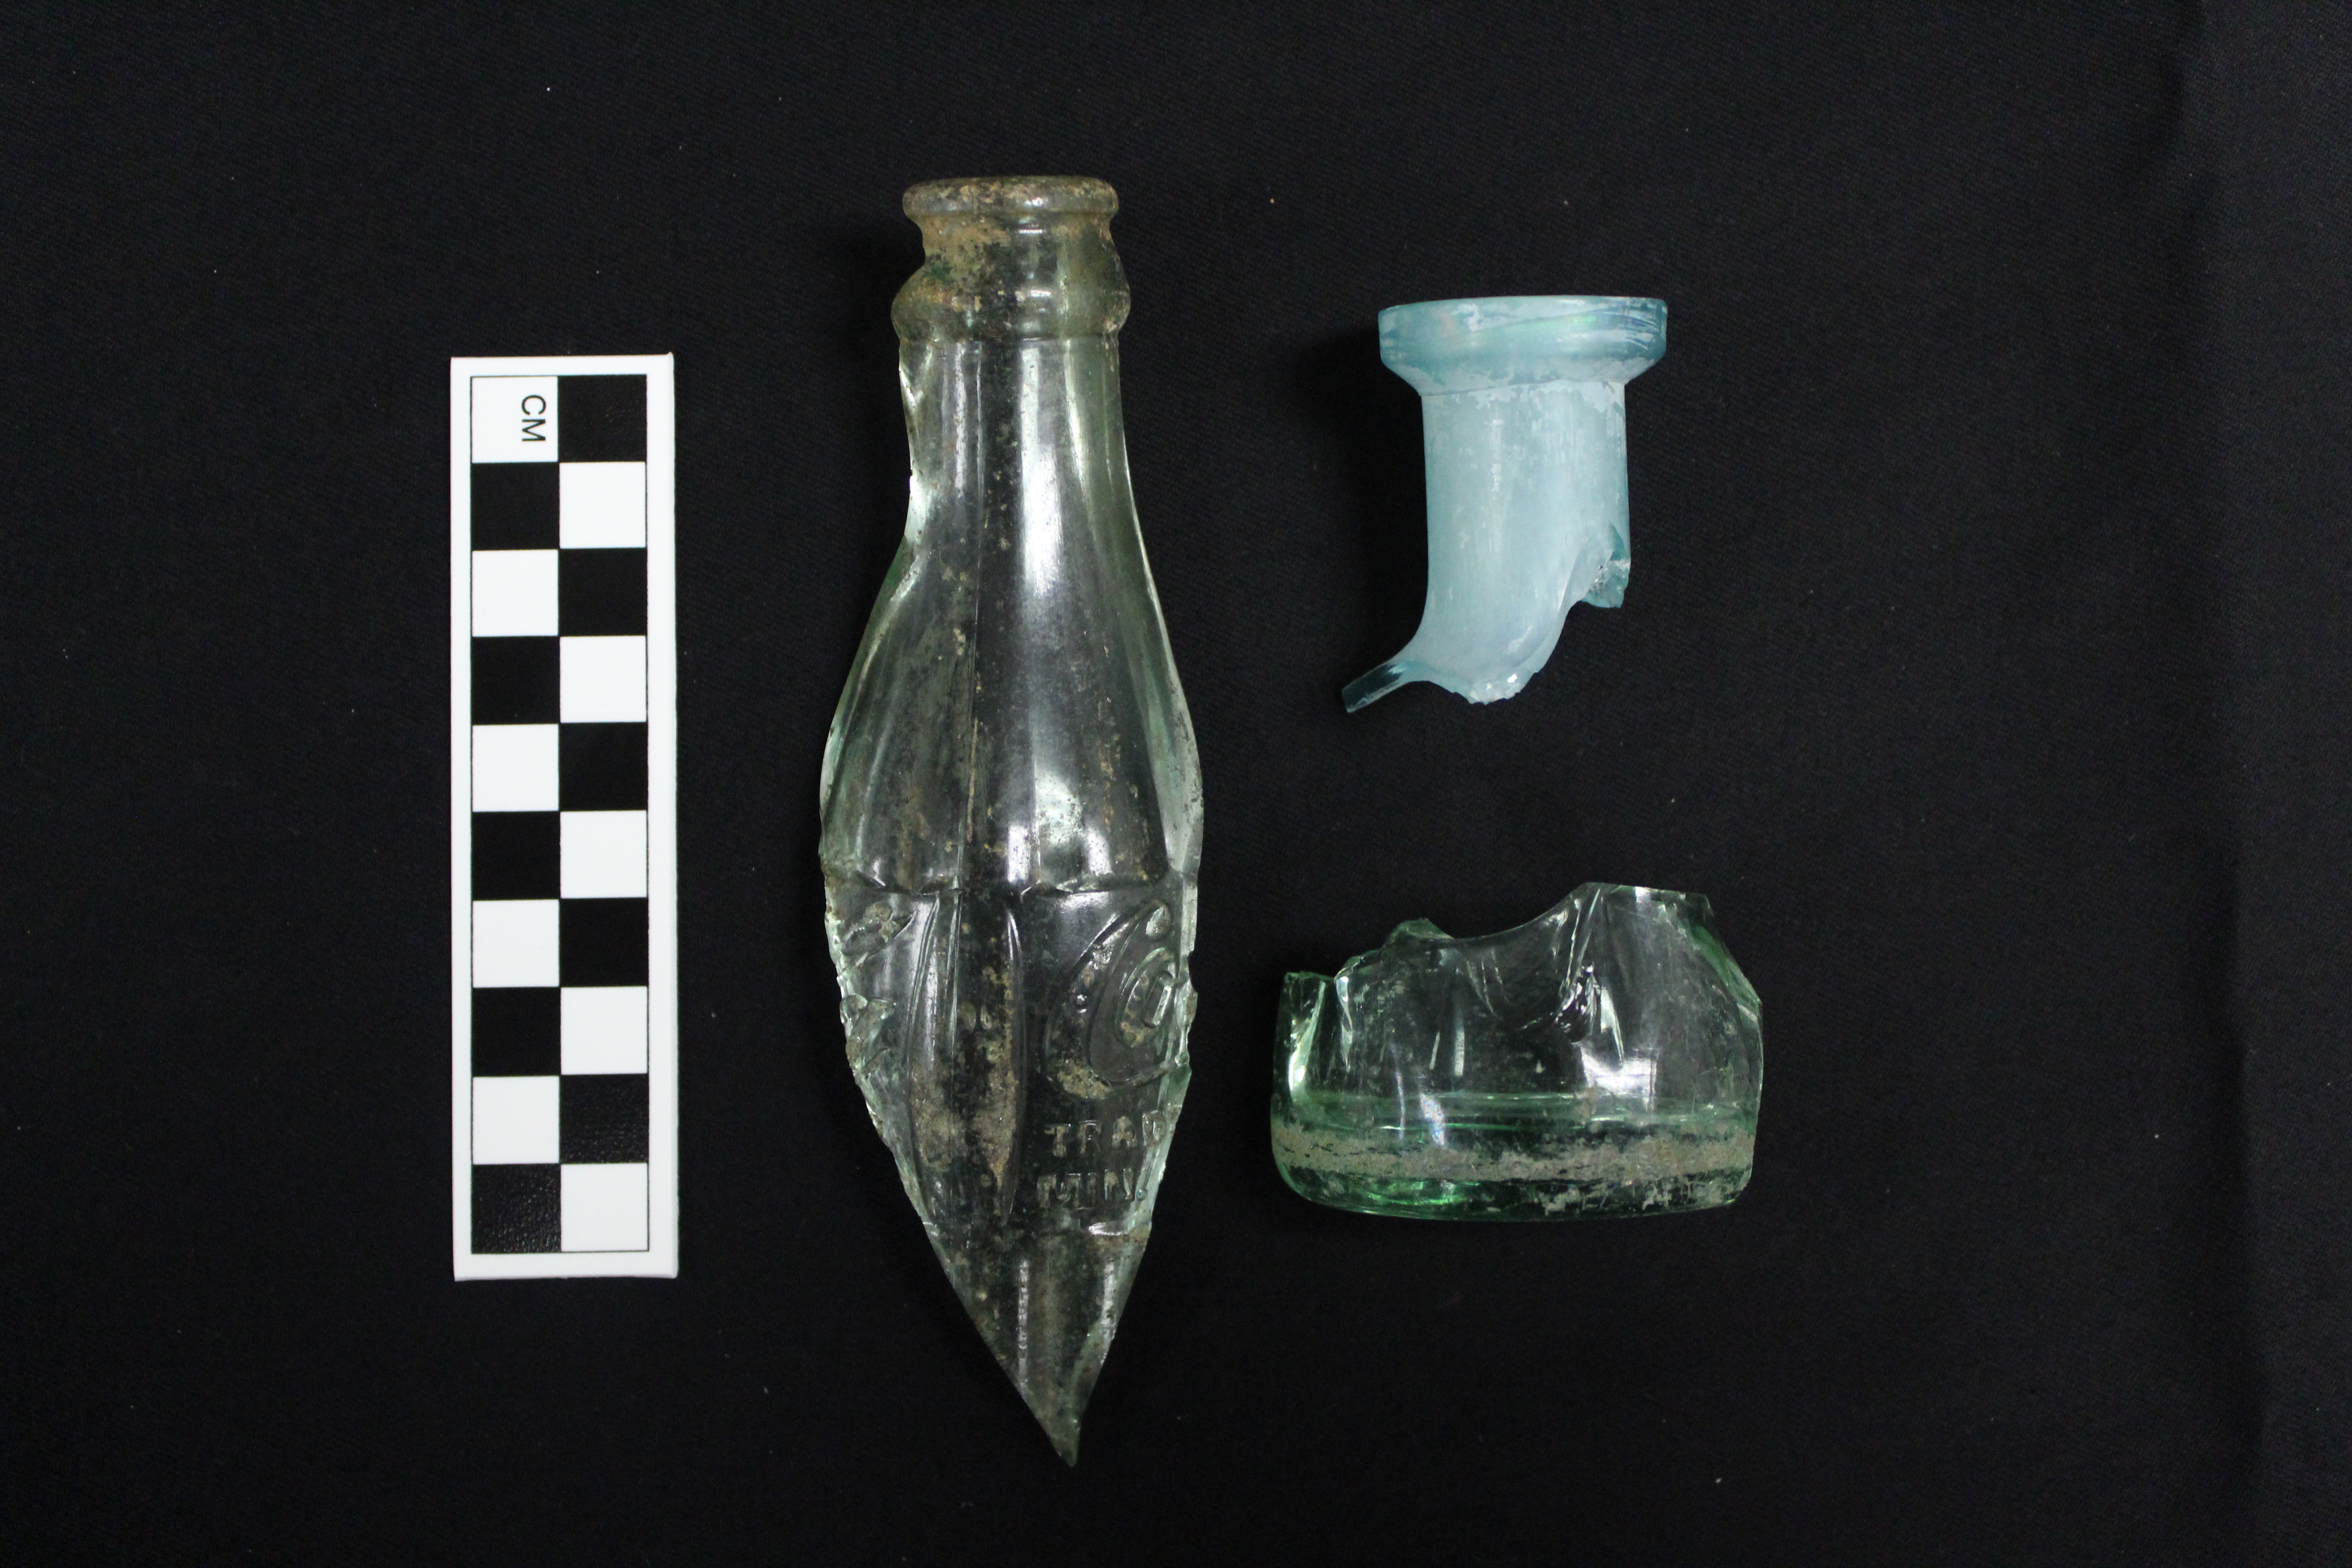 sections of three different historic glass bottles